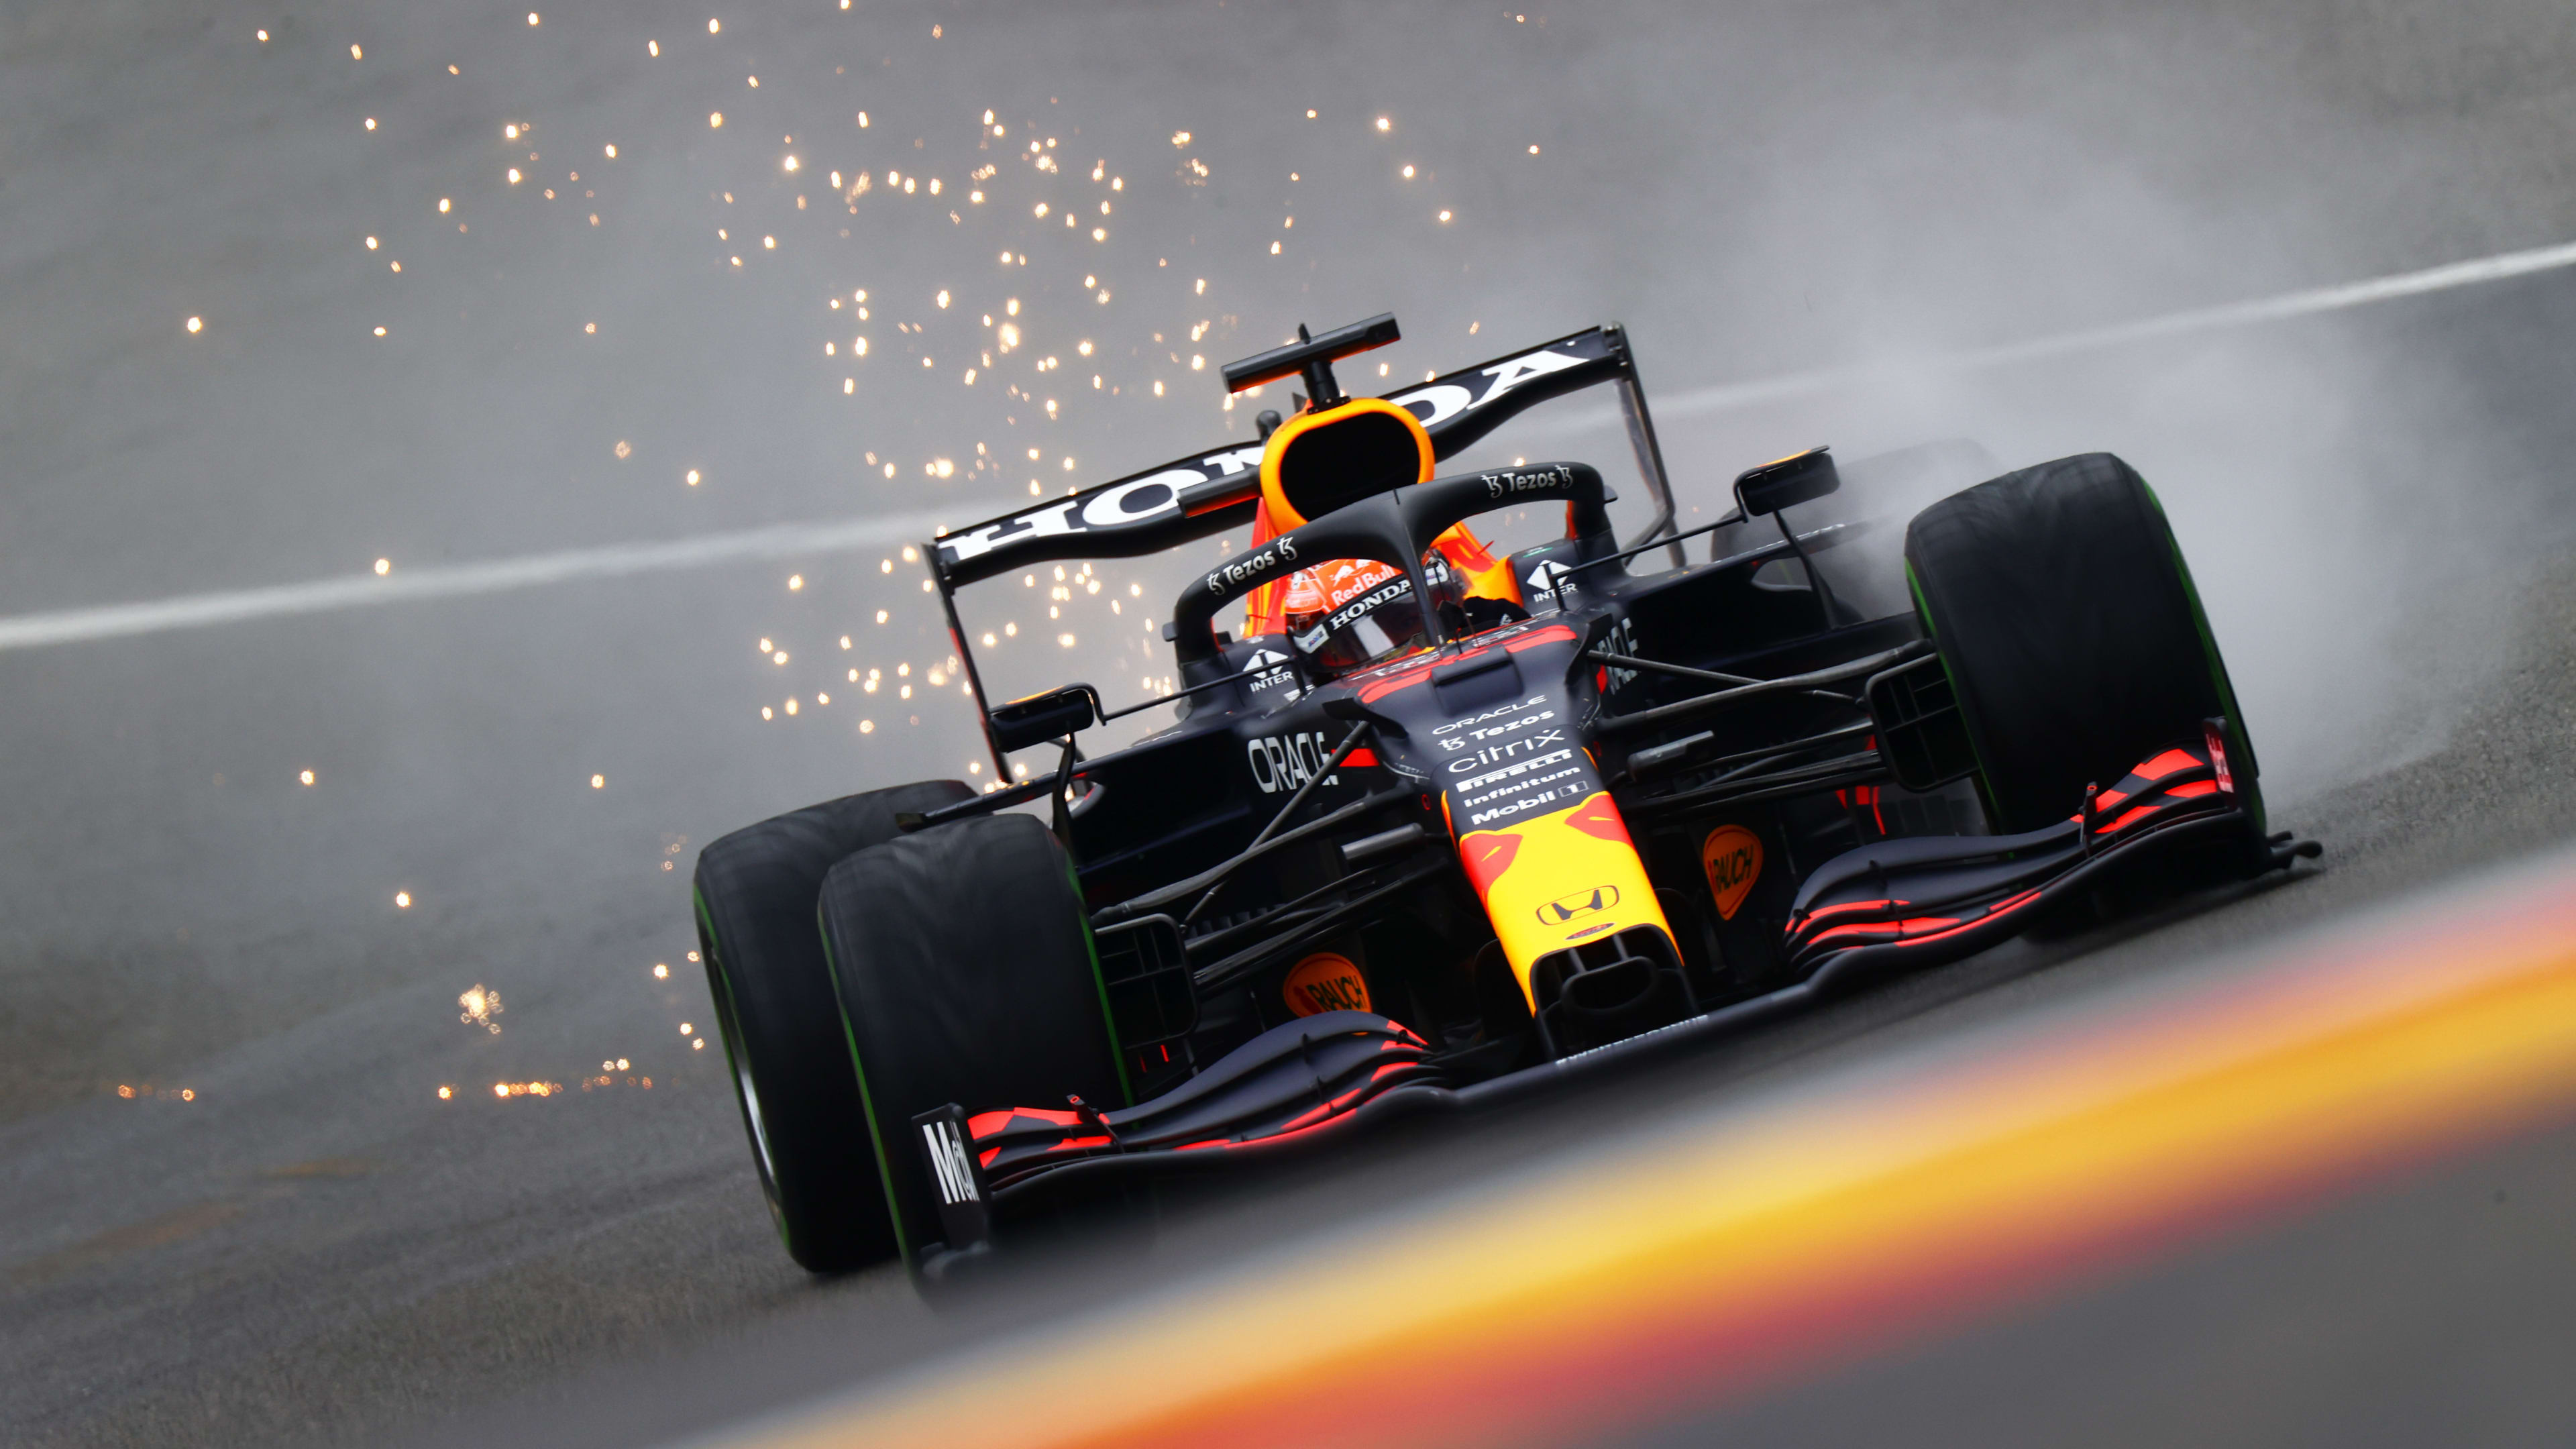 2021 Belgian Grand Prix FP3 highlights and report Verstappen leads Red Bull 1-2 in Belgian GP final practice at Spa Formula 1®